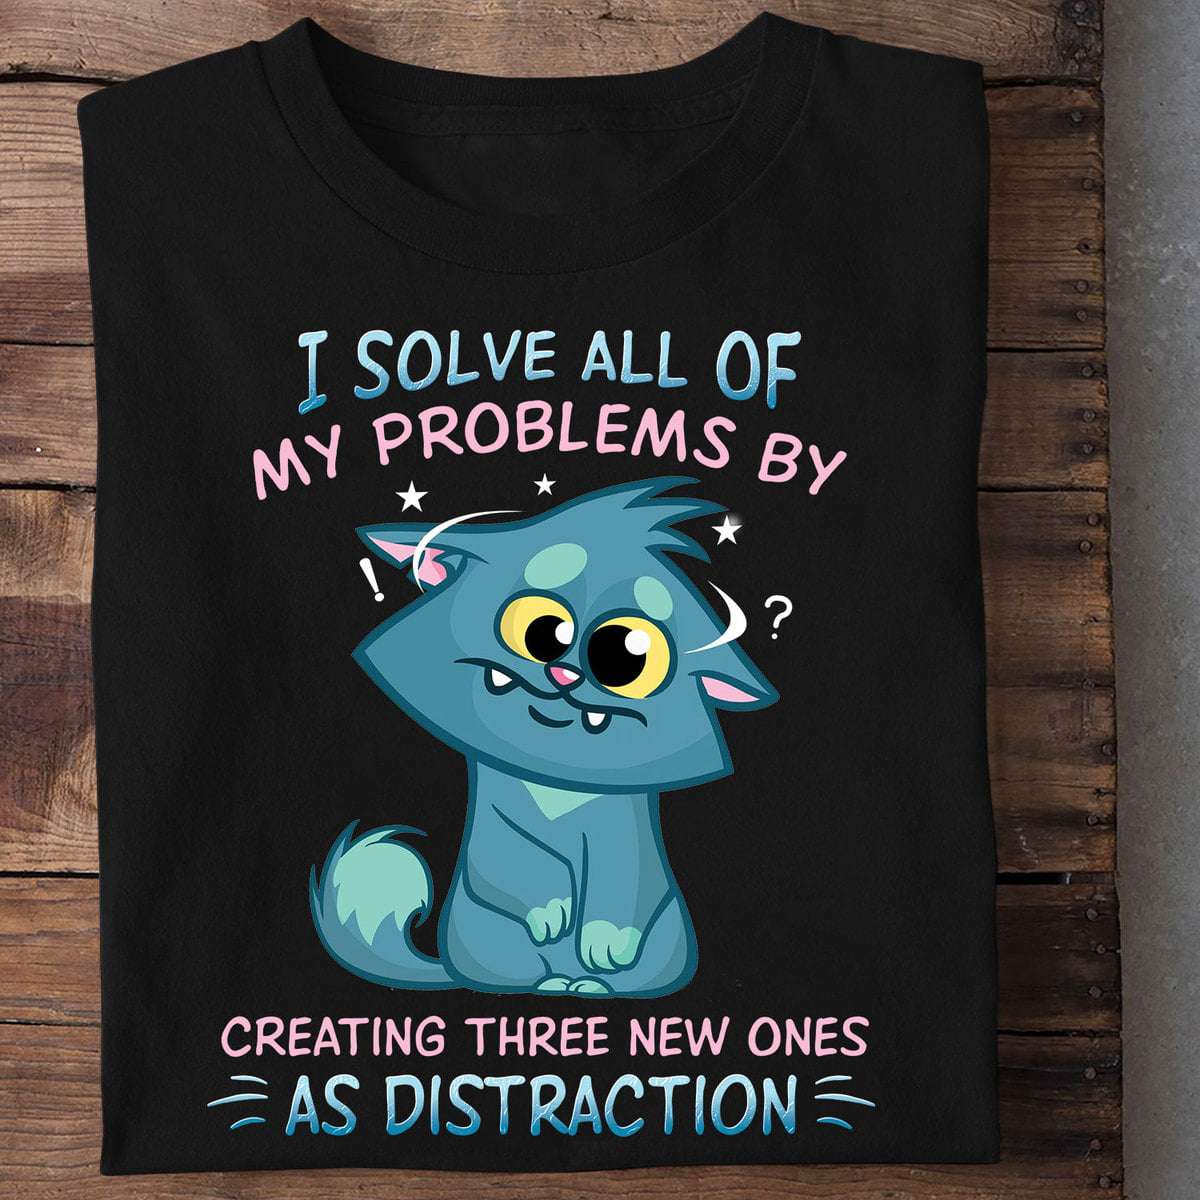 I solves all of my problems by creating three new ones as distraction - Funny animated cat, cat lover gift